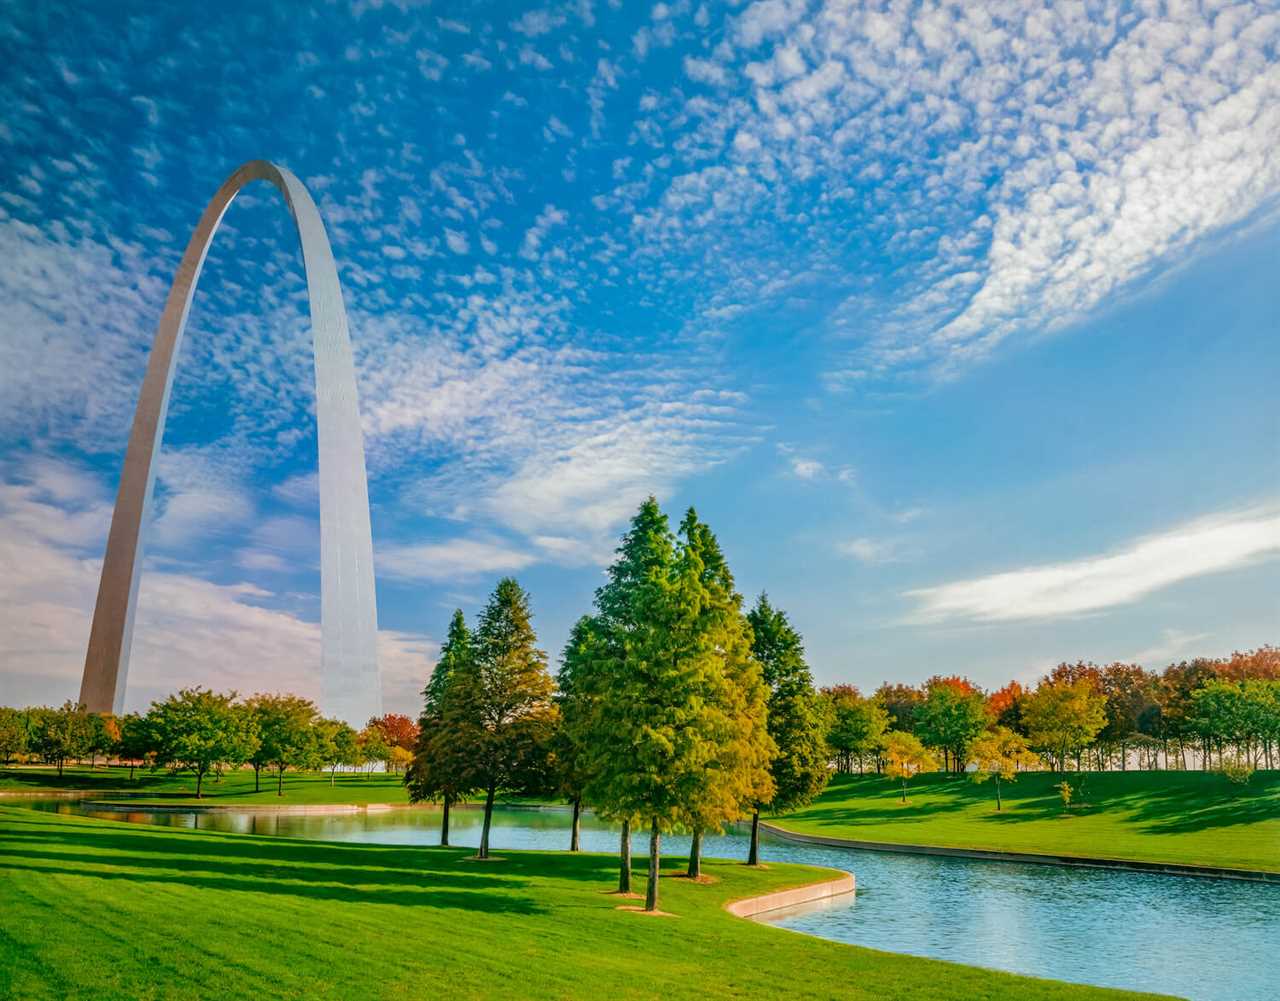 when-to-visit-guide-to-rving-gateway-arch-national-park-02-2023 